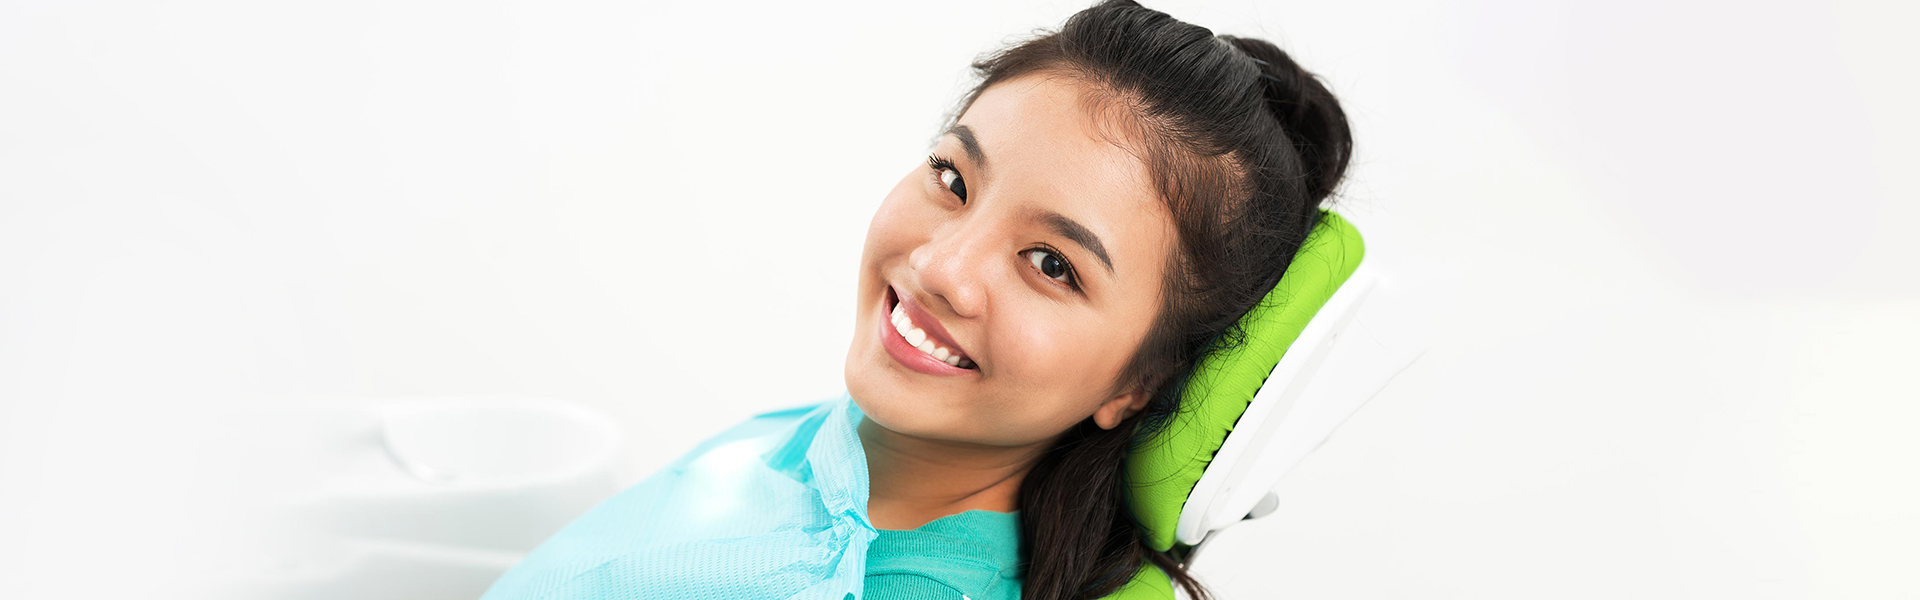 What Can a Cosmetic Dental Office Do for You?